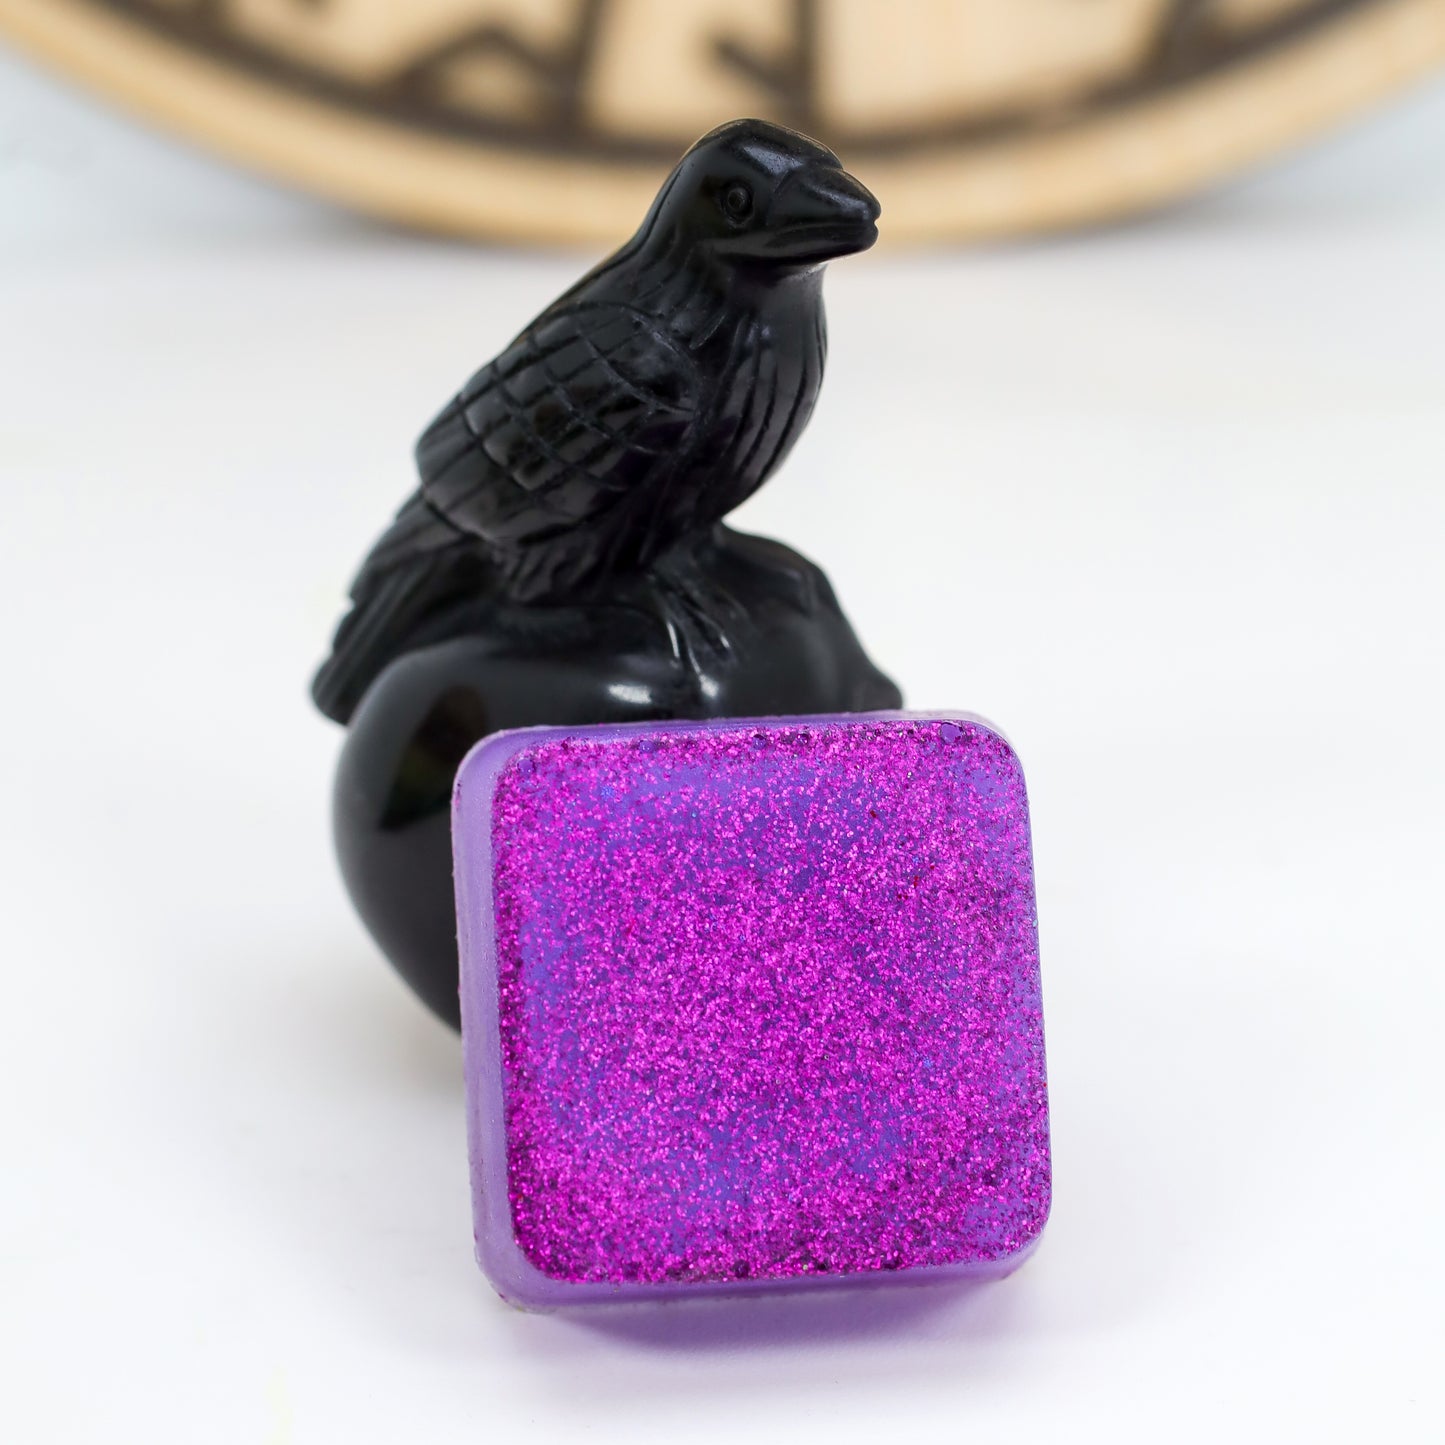 Live Tiny Hand Soaps (Made with an audience!), Birds of Valhalla, , Birds of Valhalla